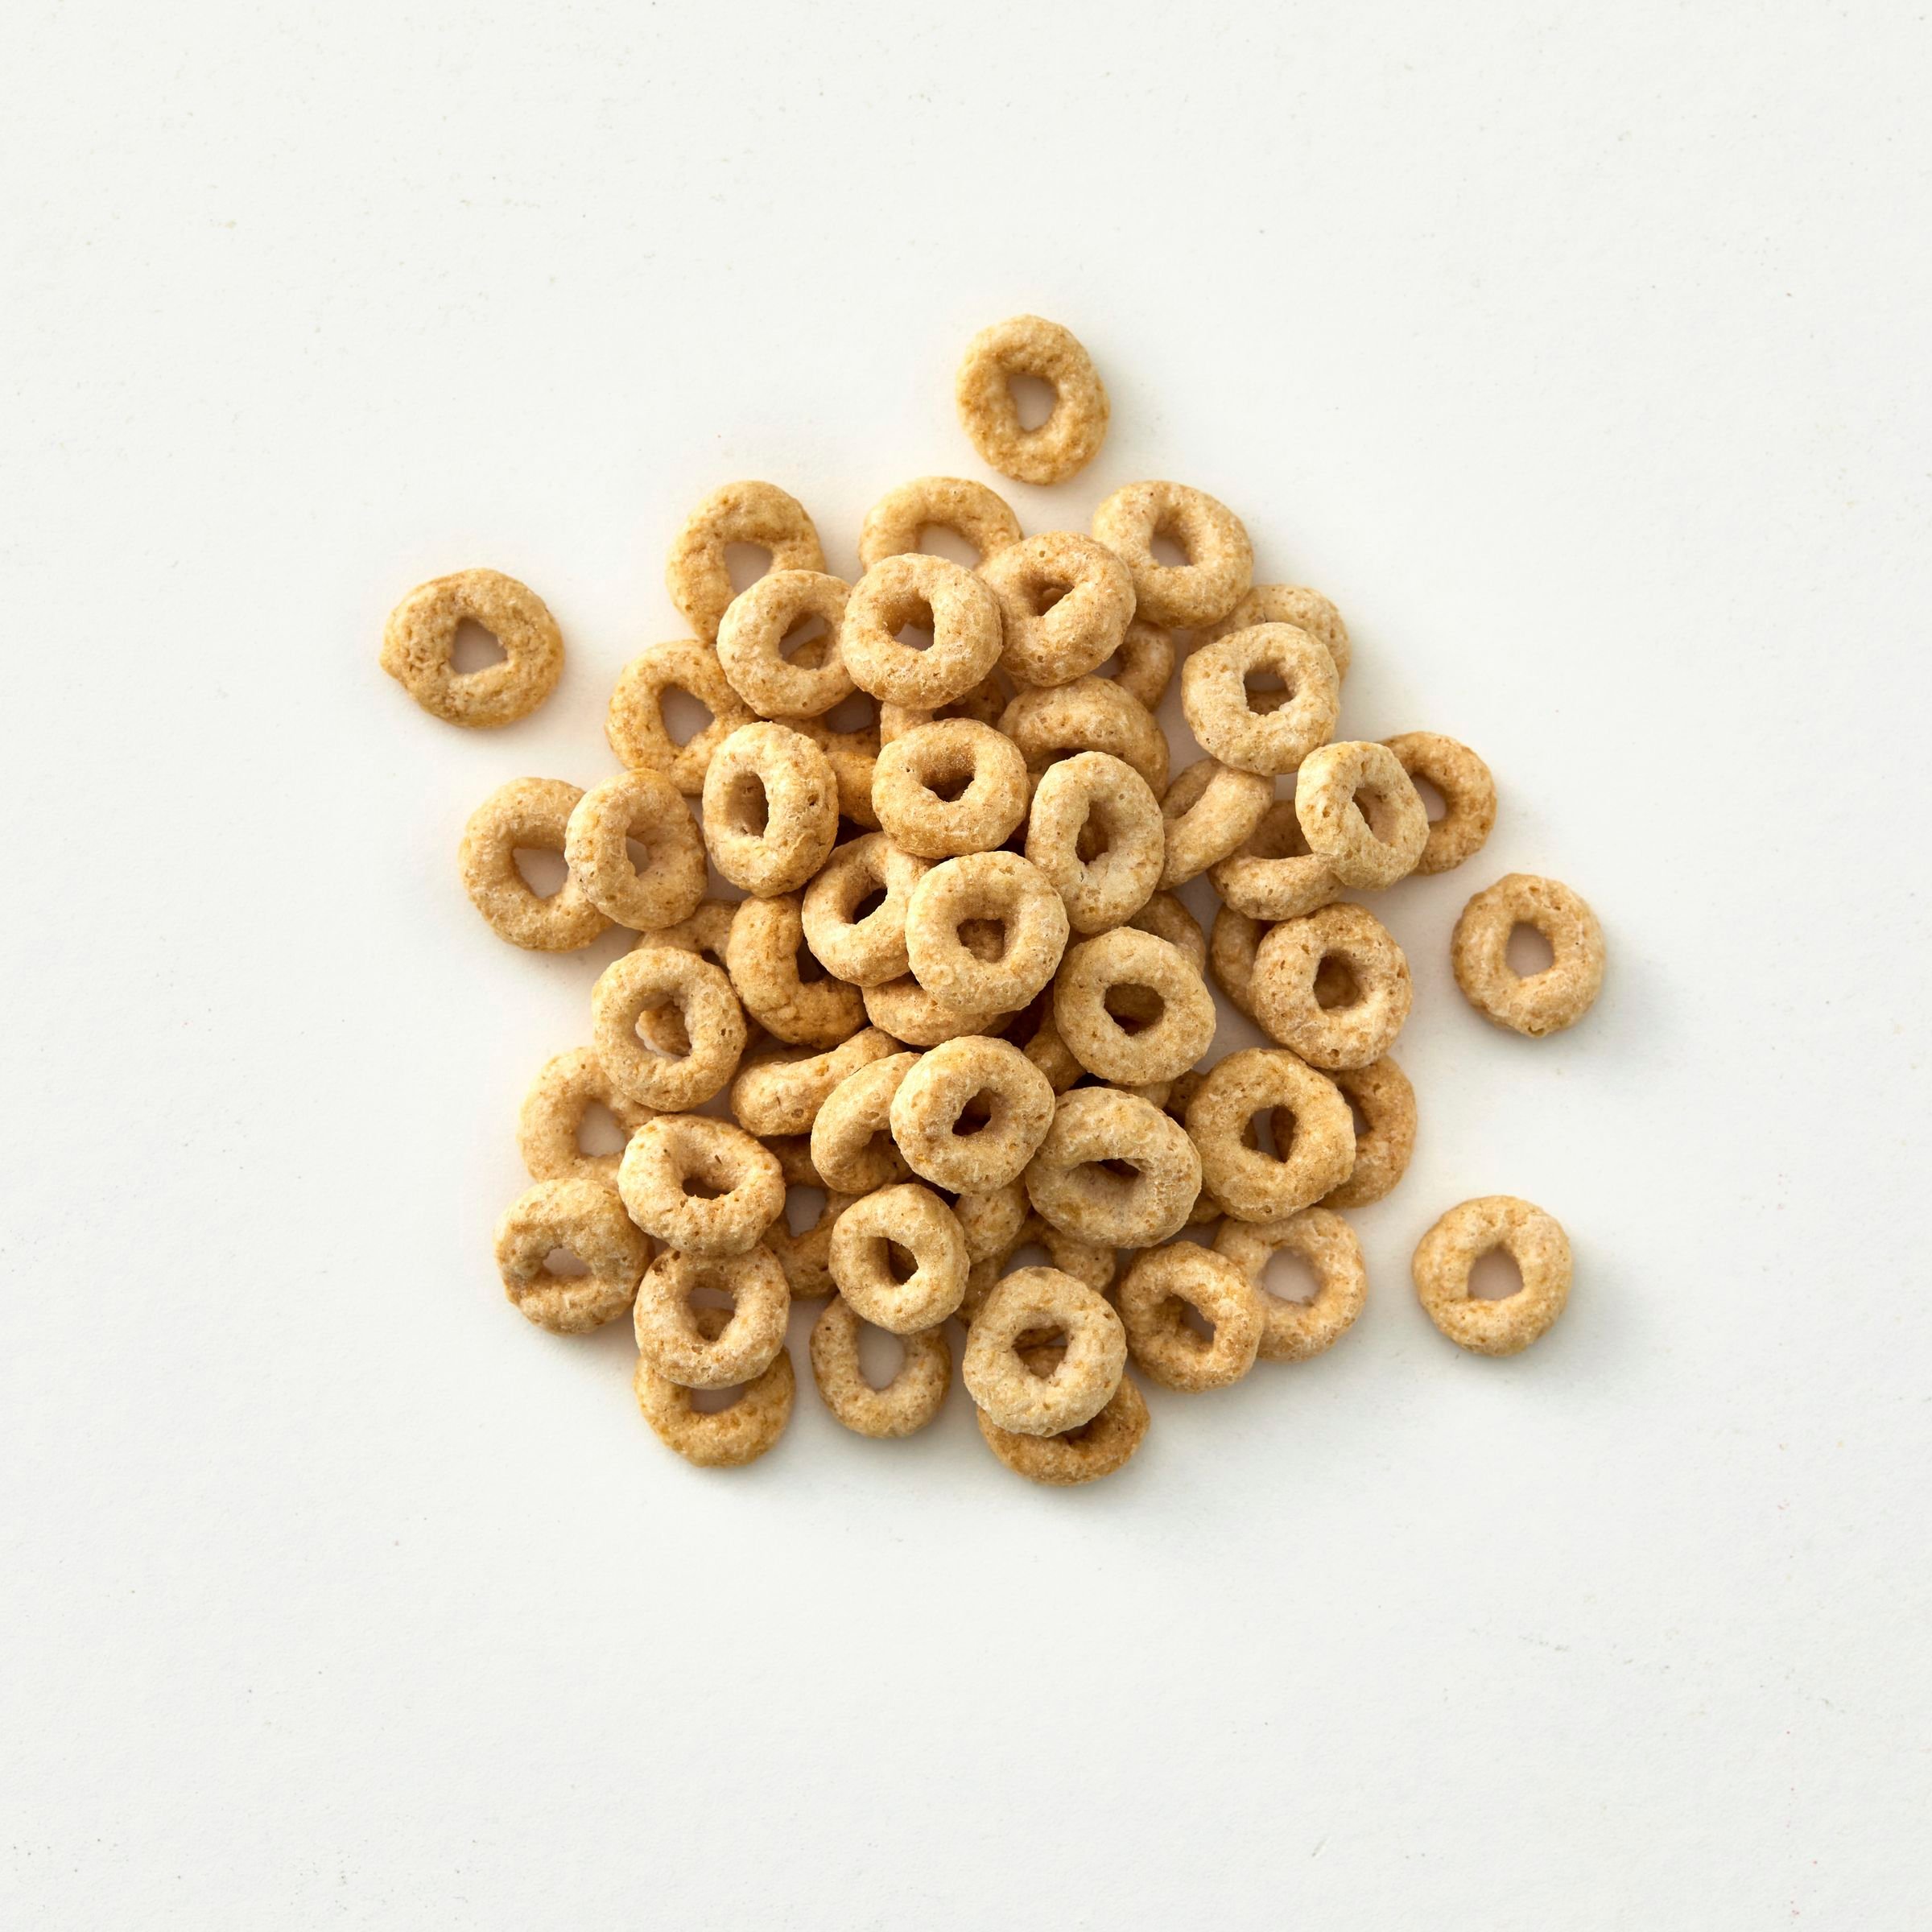 CHEERIOS - JUMBO SIZE PACK - Naturally Flavoured Honey Nut Cereal Box,  Whole Grain is the First Ingredient, Made with Real Honey, 1.3 Kilograms